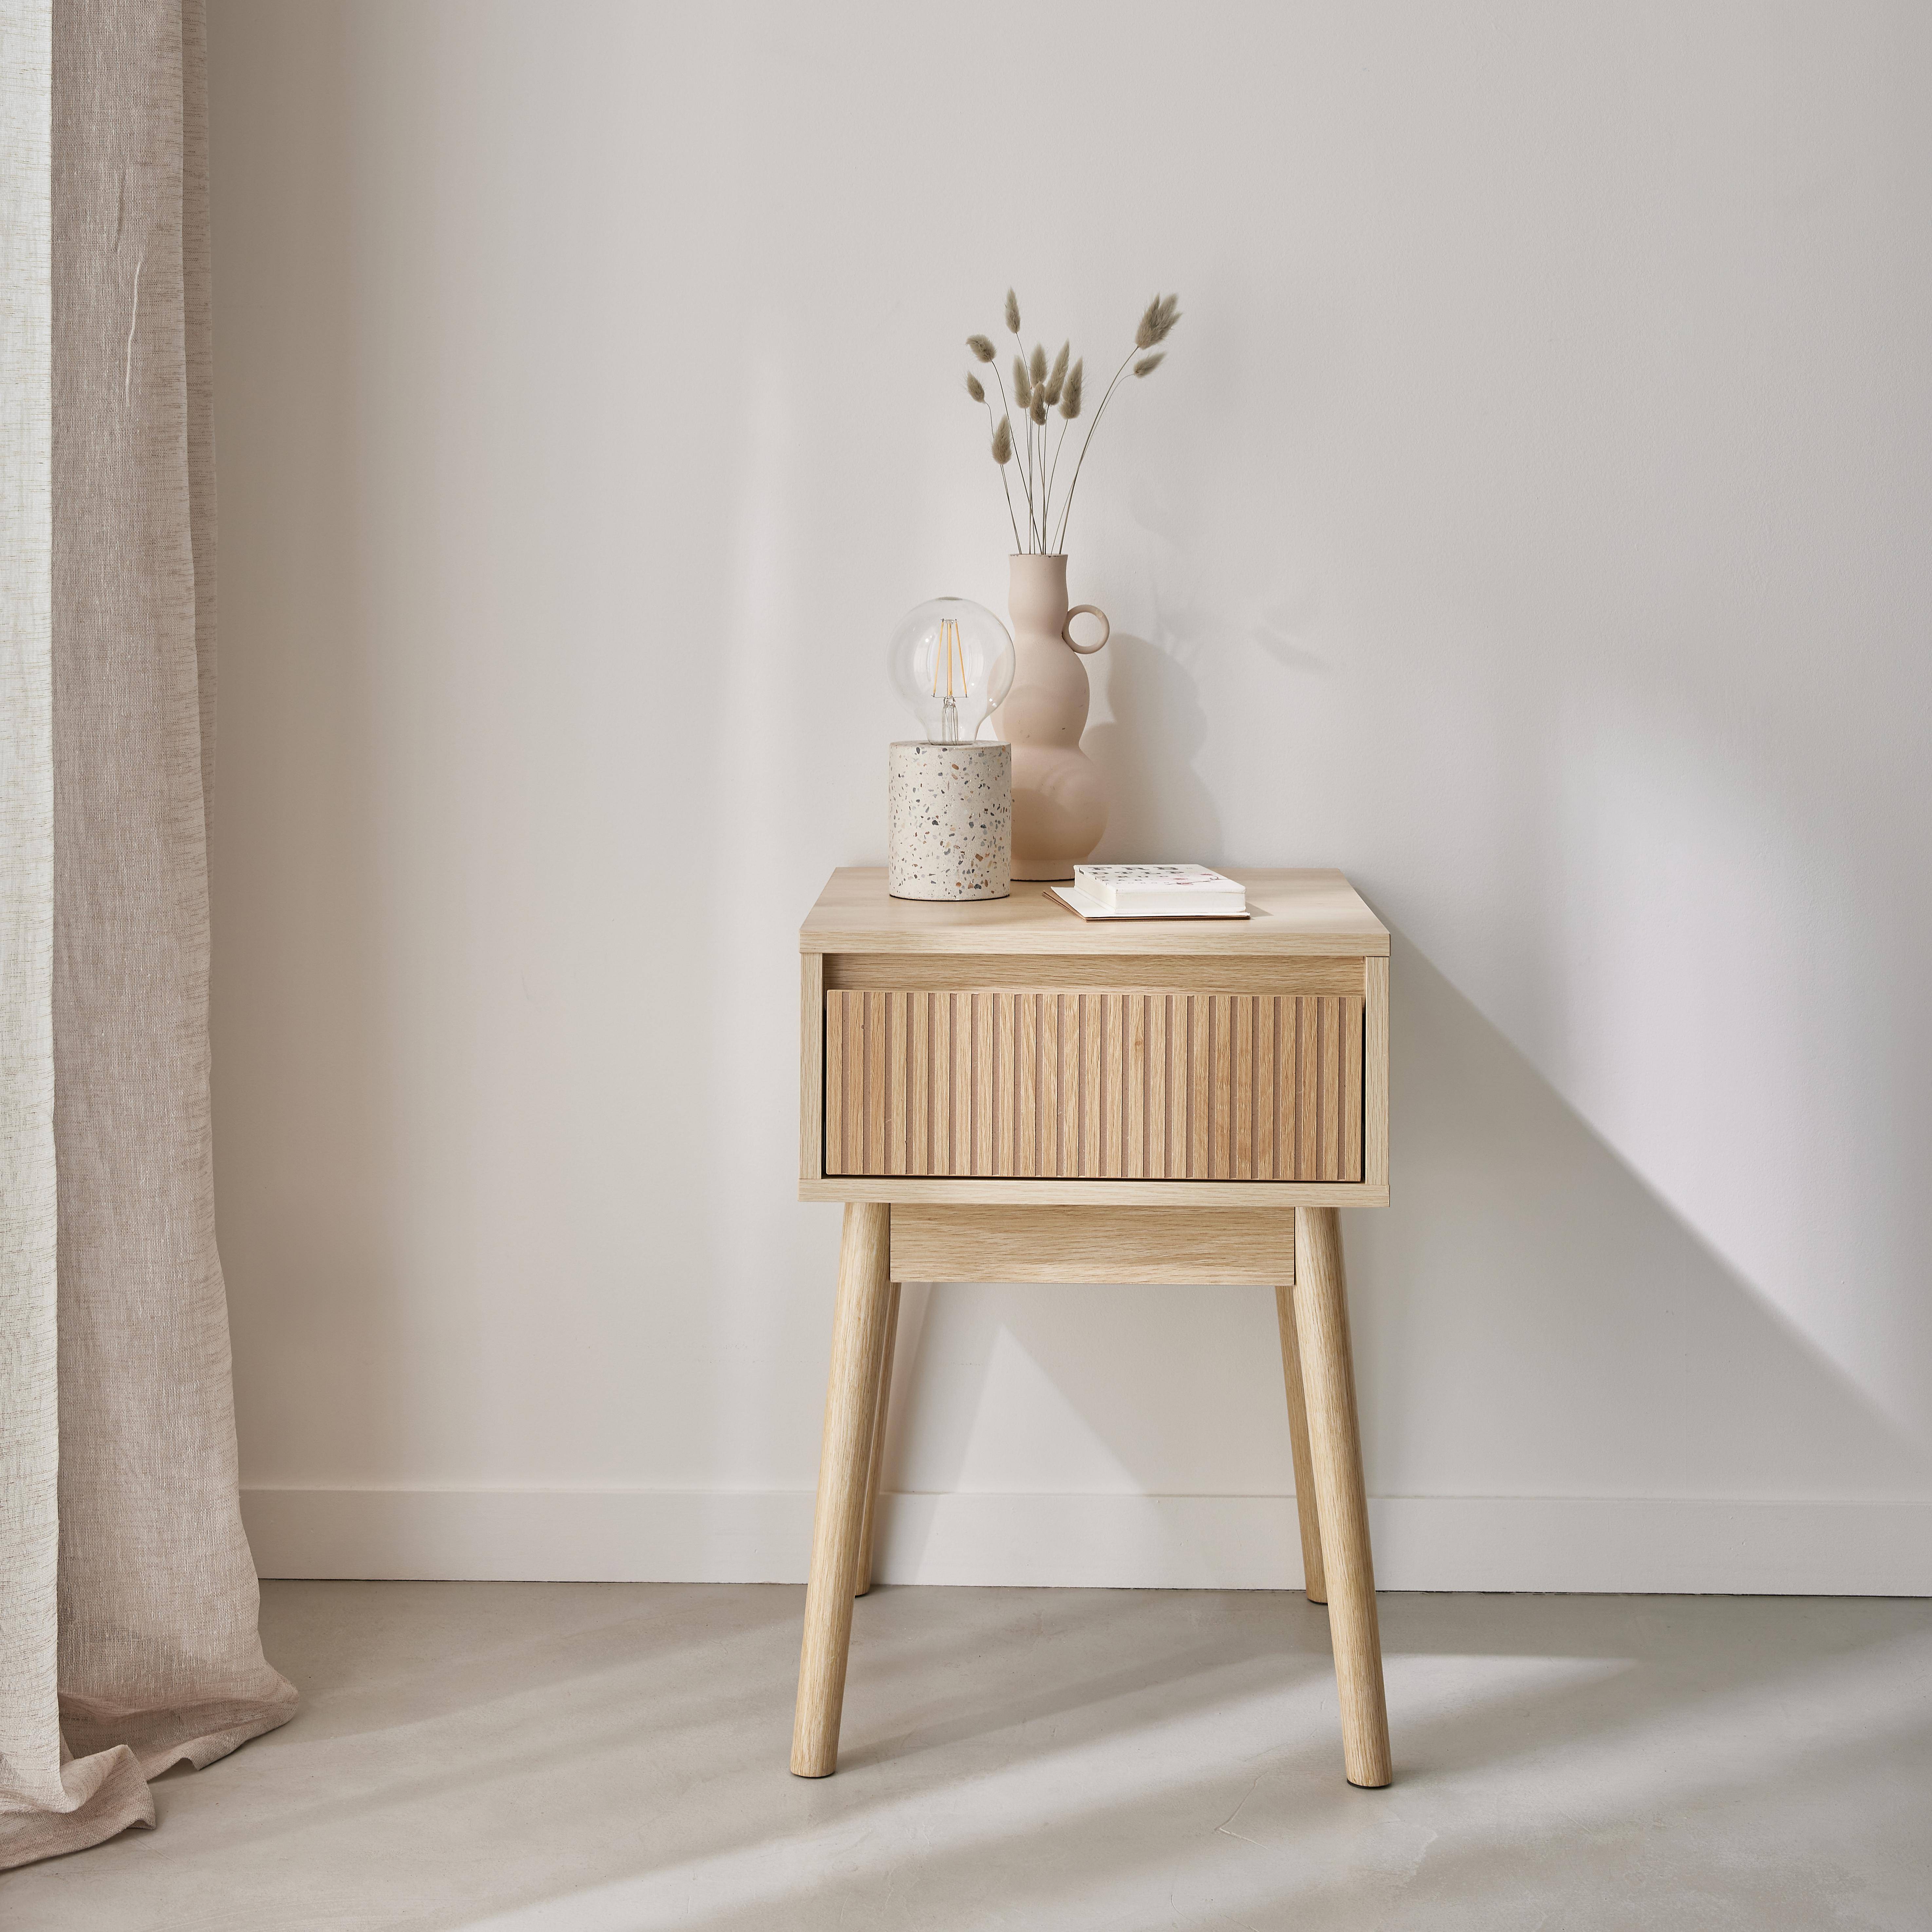 Bedside table with one drawer. Natural colour laminate panels. Fir wood legs.  W 39 x 39 x H 55.4cm LINEAR Photo1